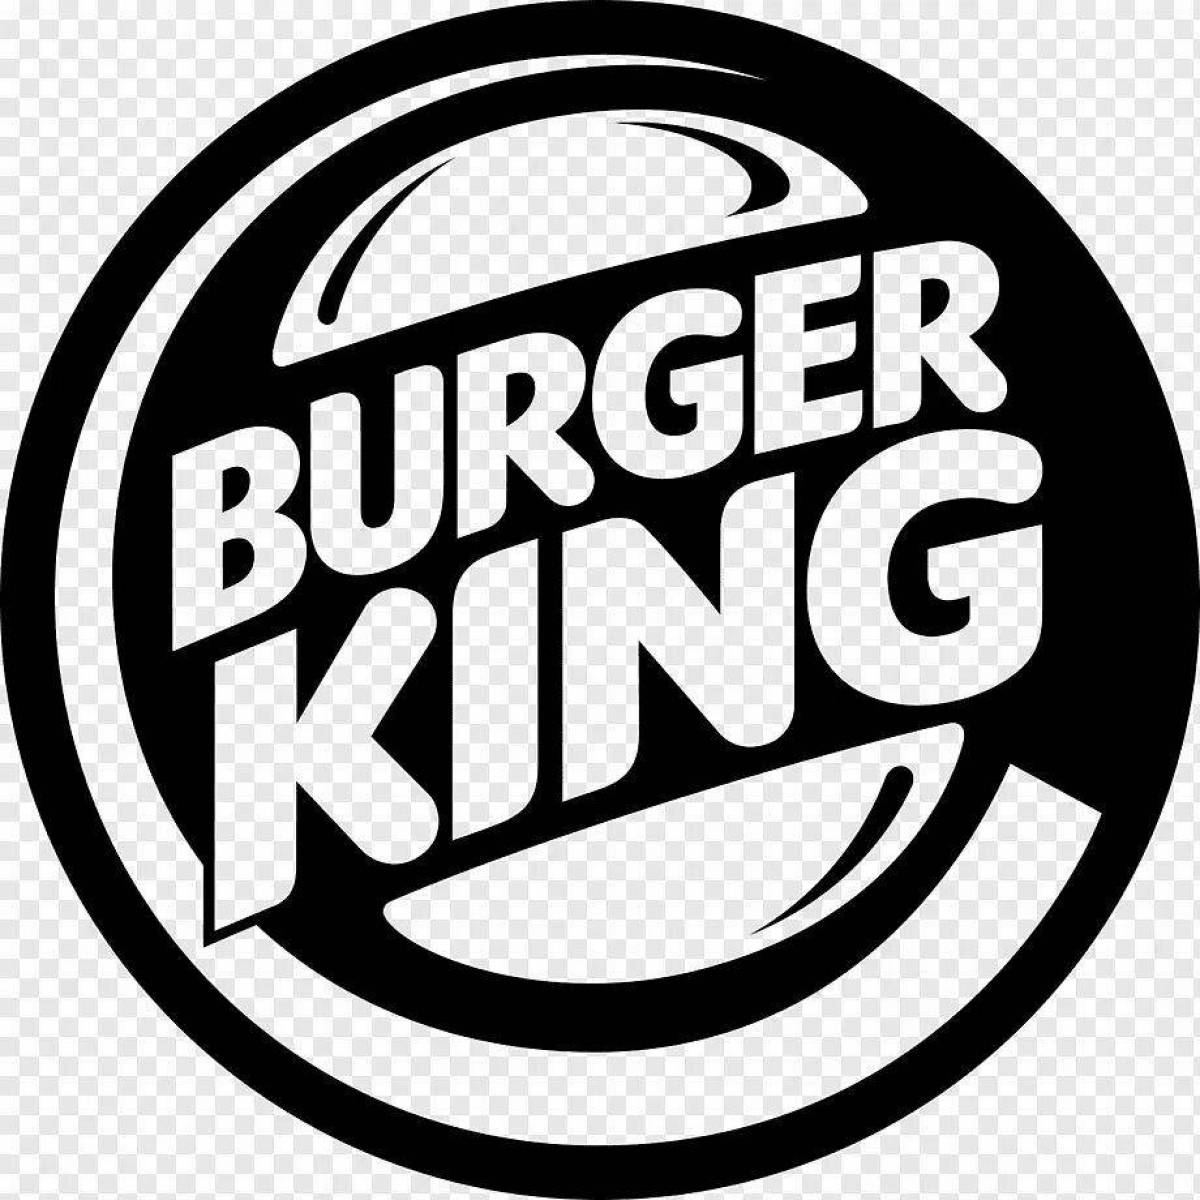 Burger king live coloring page